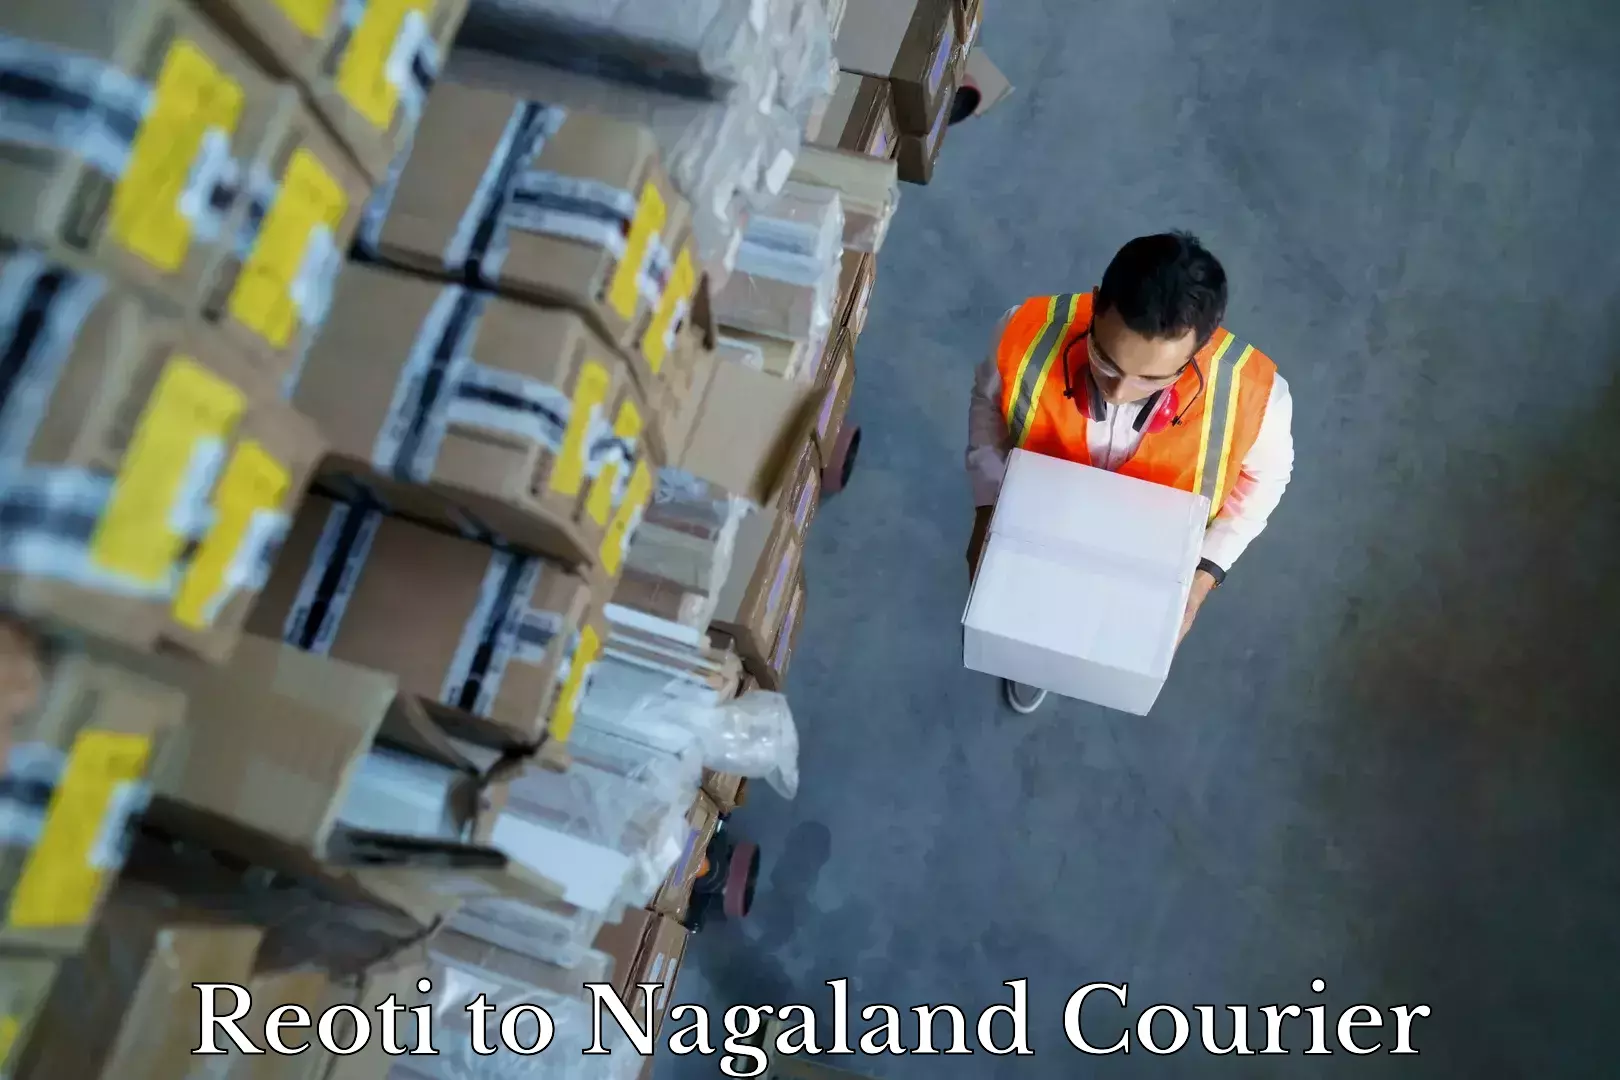 Trusted moving company Reoti to Nagaland